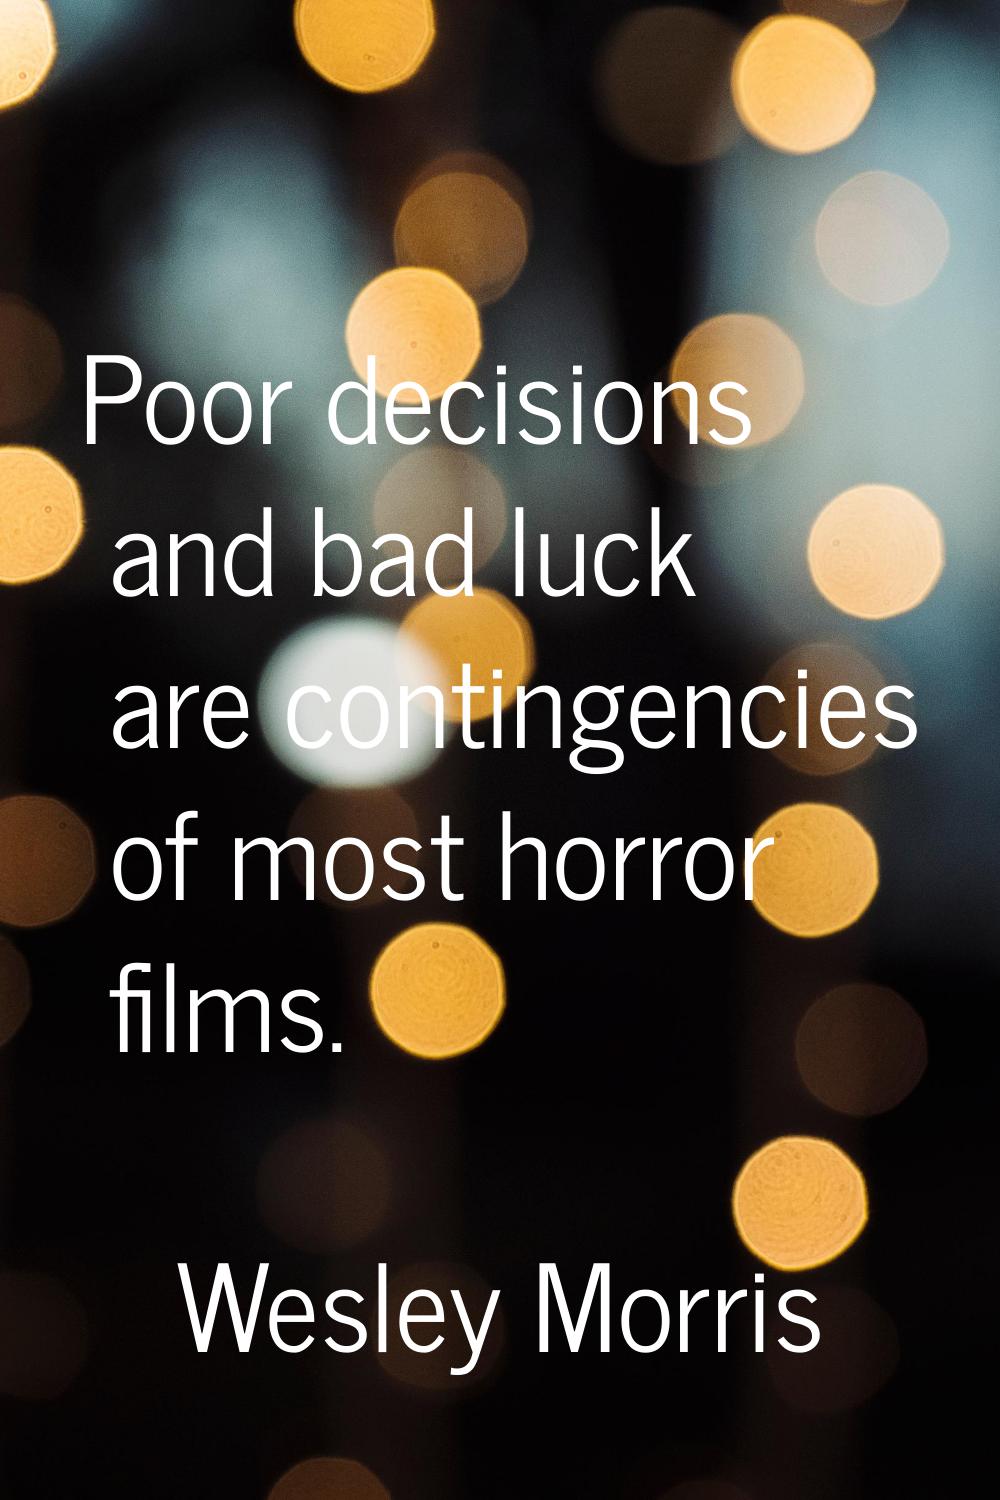 Poor decisions and bad luck are contingencies of most horror films.